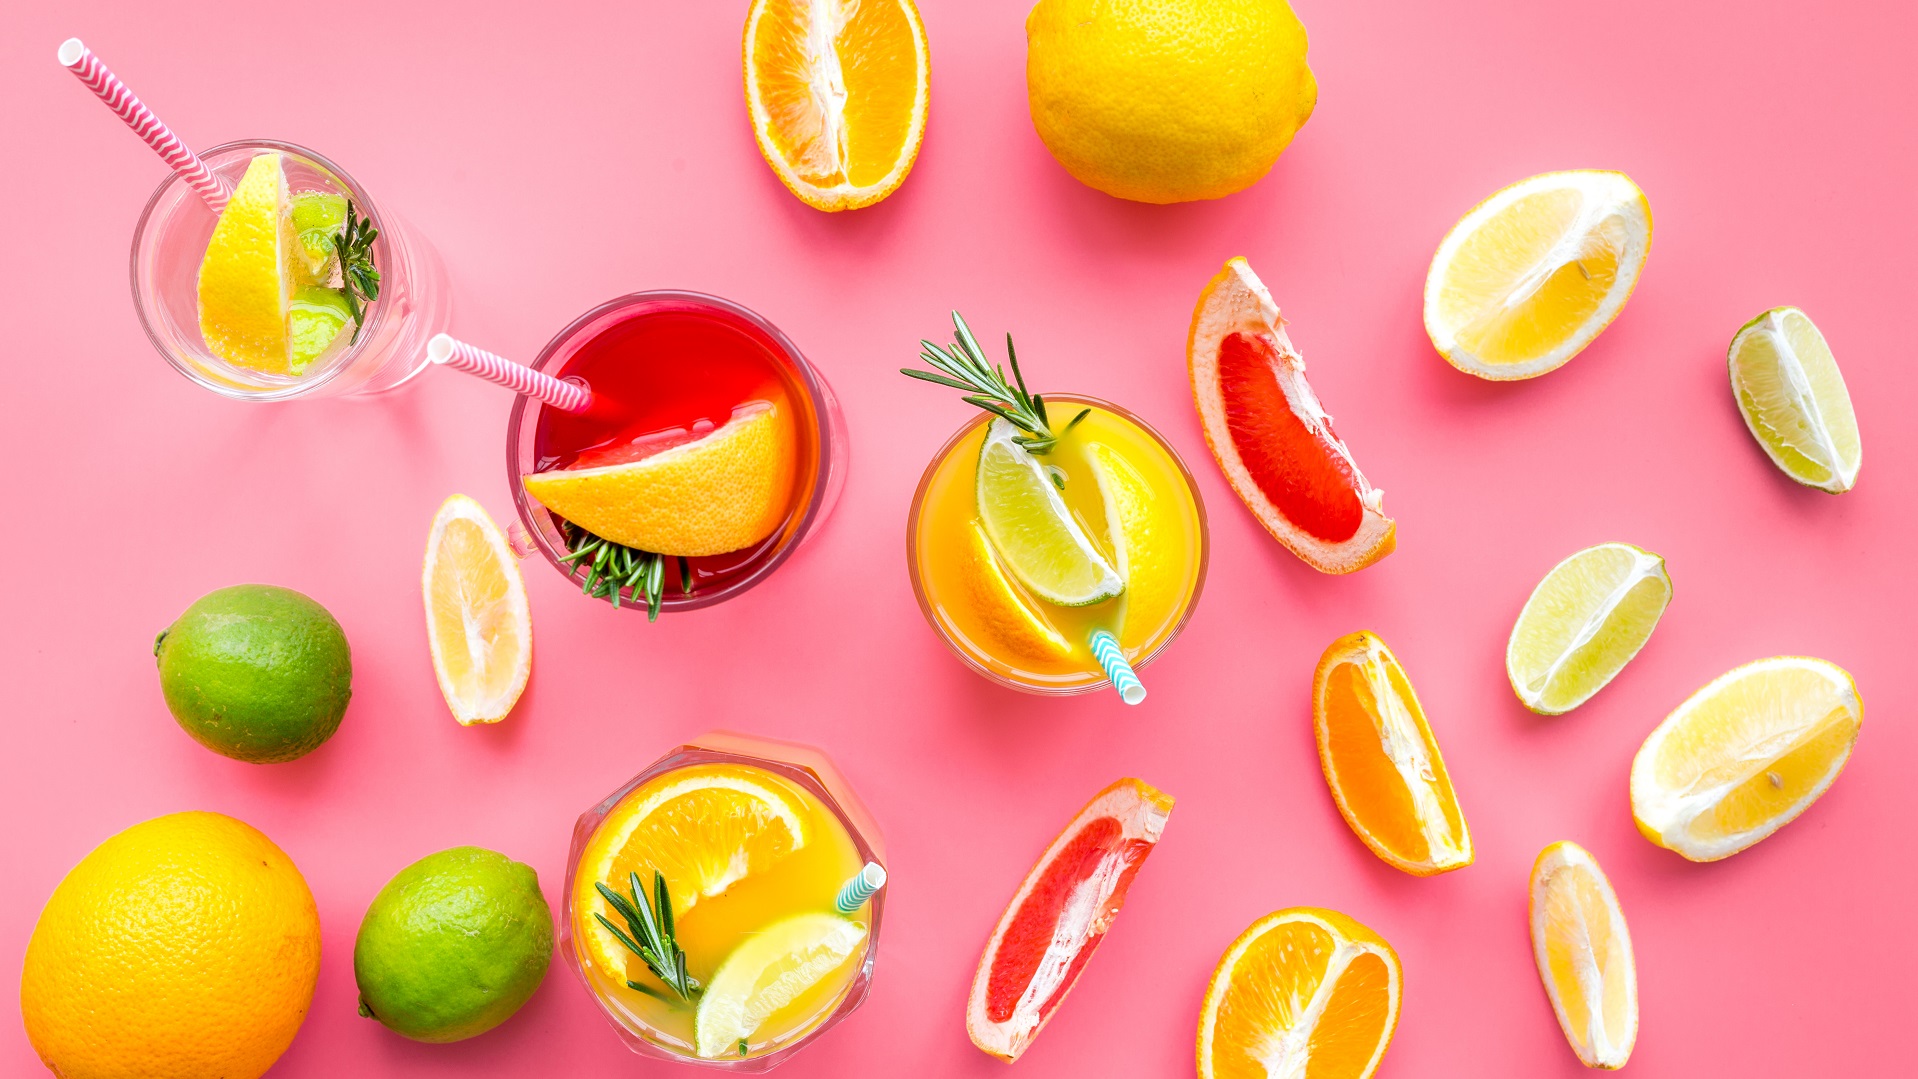 Dive into the ultimate summer trends guide featuring our future flavor forecast, eatertainment and stadium venues, summer LTOs, seasonal flavors, and more